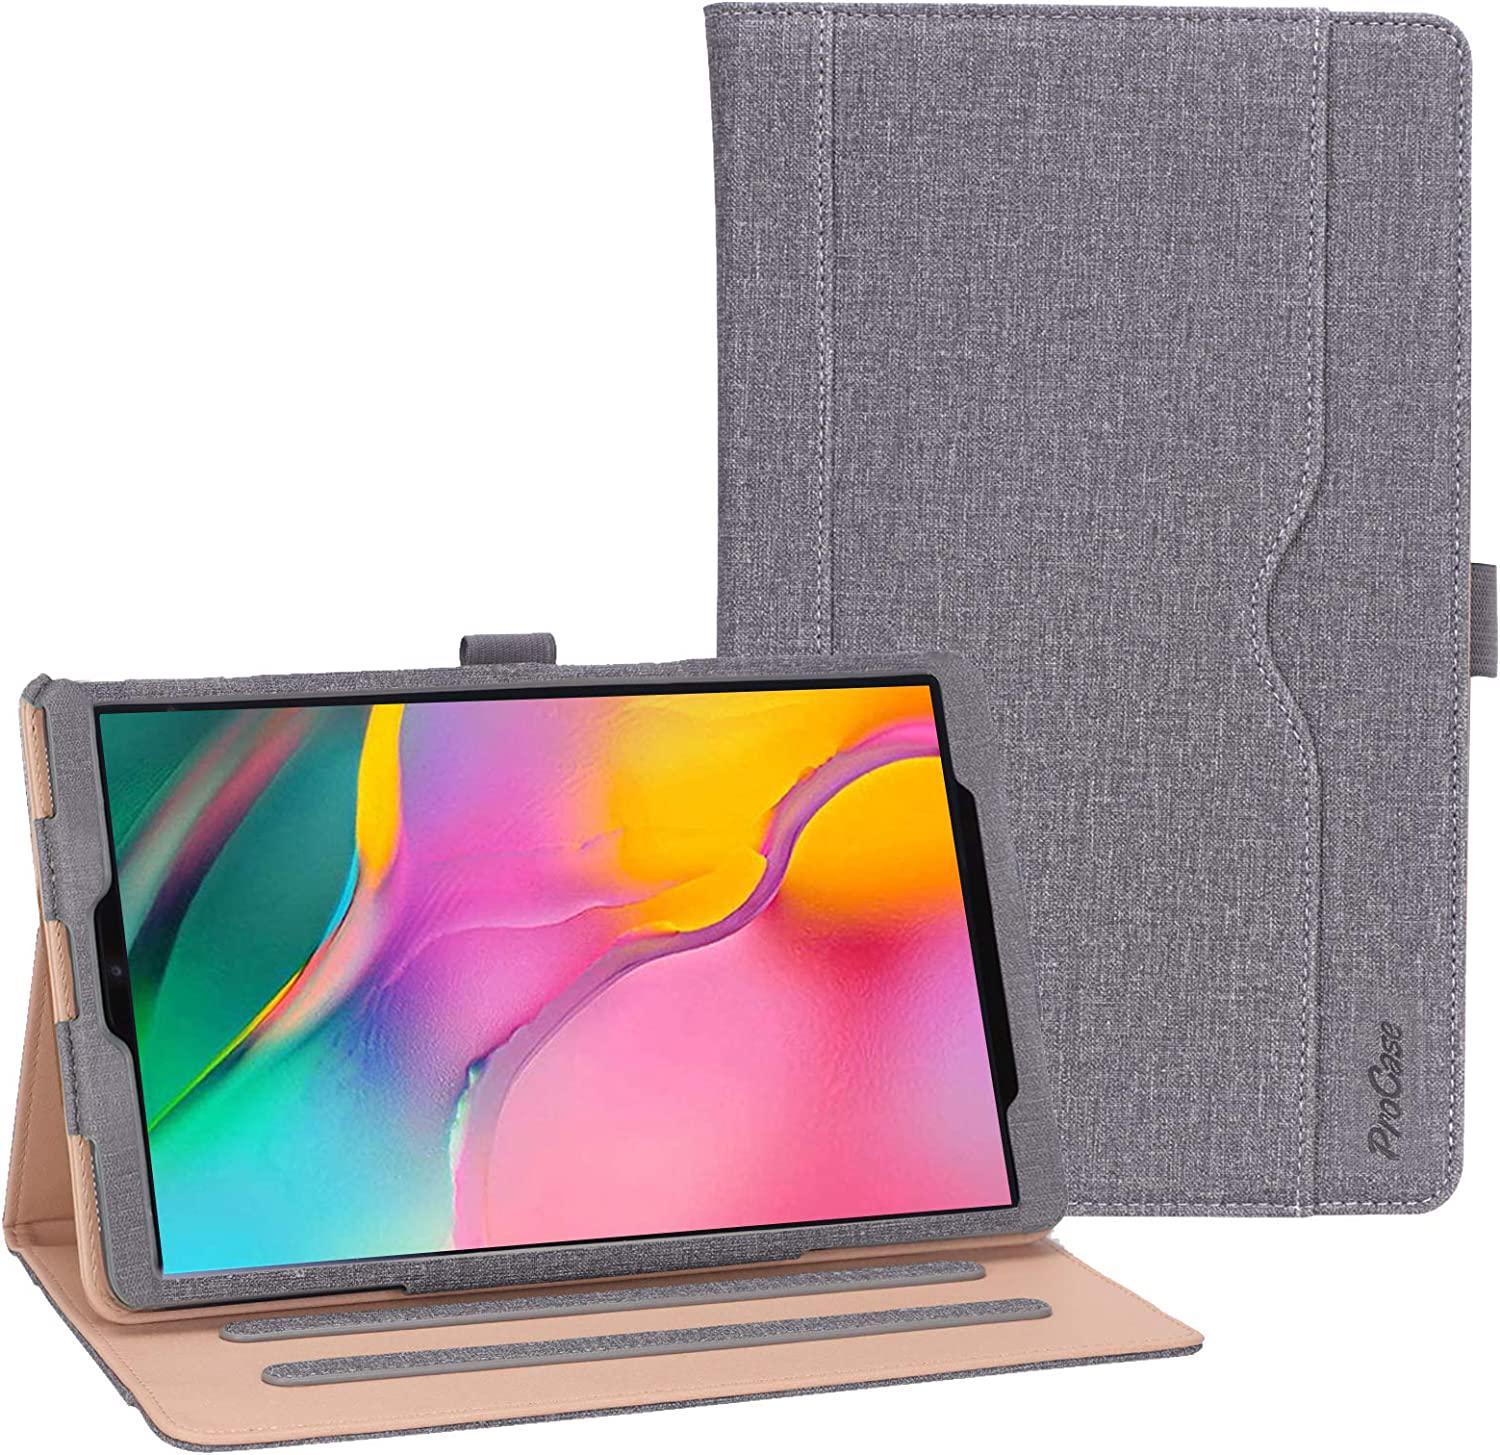 Procase, ProCase Galaxy Tab A 10.1 Case 2019 Model T510 T515 T517 - Stand Folio Case Cover for Galaxy Tab A 10.1 Inch 2019 Tablet SM-T510 SM-T515 SM-T517 -Grey